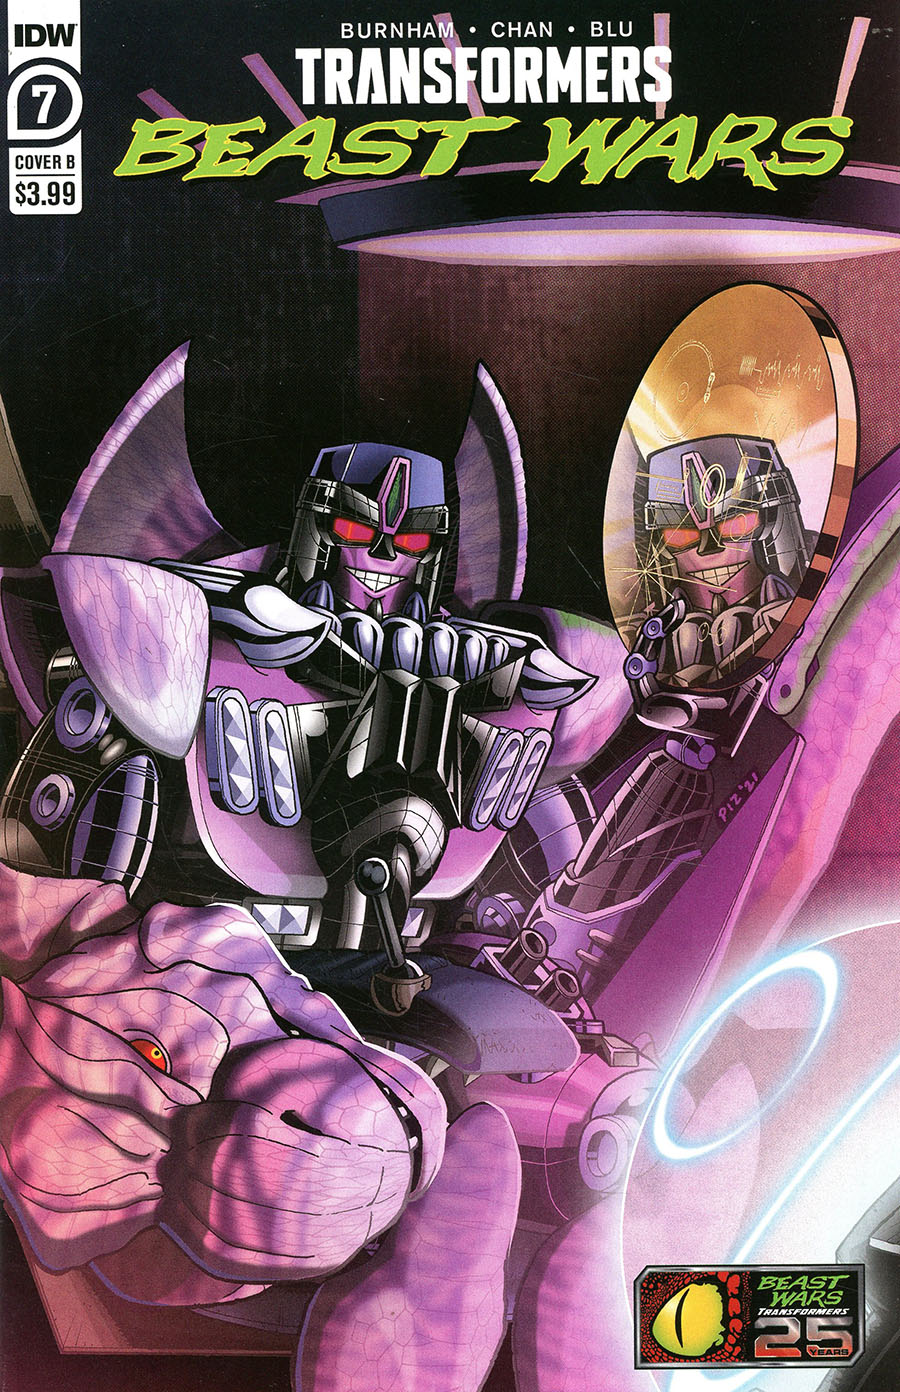 Transformers Beast Wars Vol 2 #7 Cover B Variant Ed Pirrie Cover